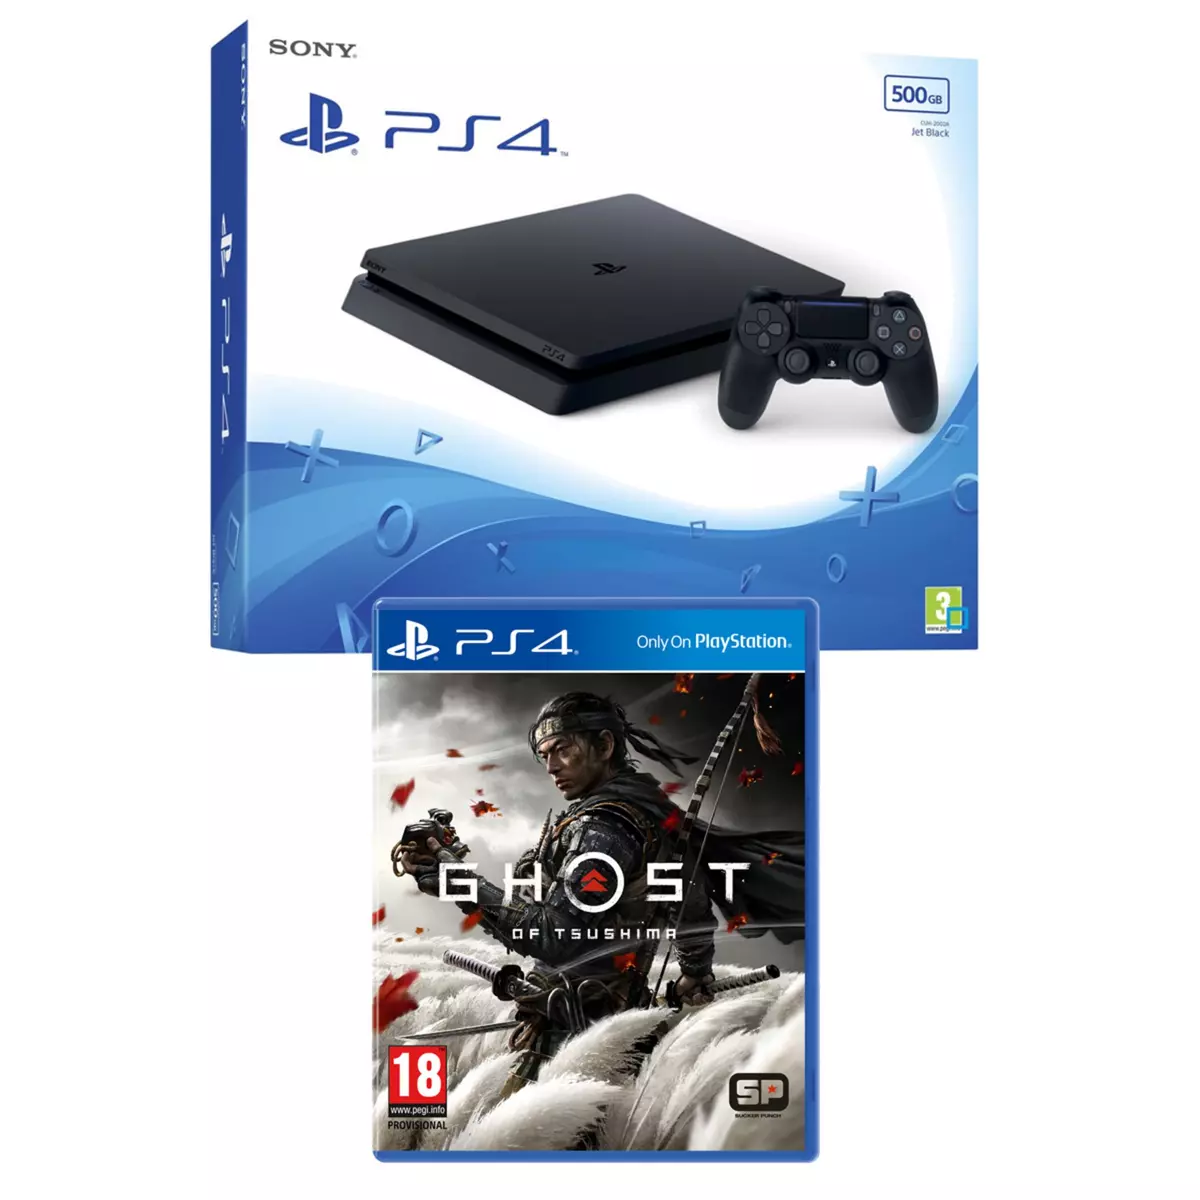 SONY Console PS4 Slim Noire 500Go + Ghost of Tsushima PS4